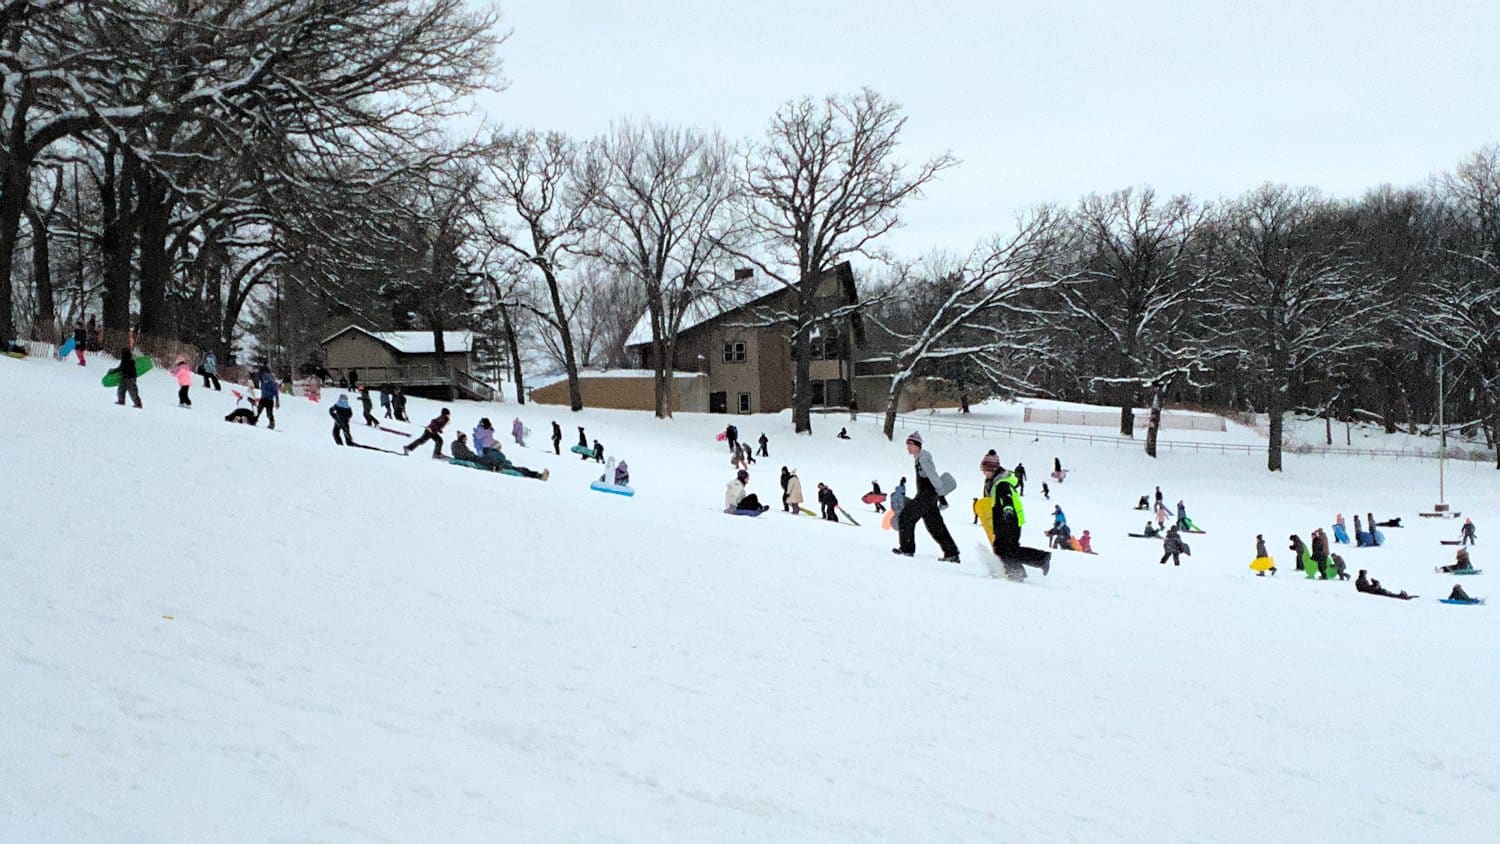 Kids and adults sledding on the hill at Veteran Acres Park.